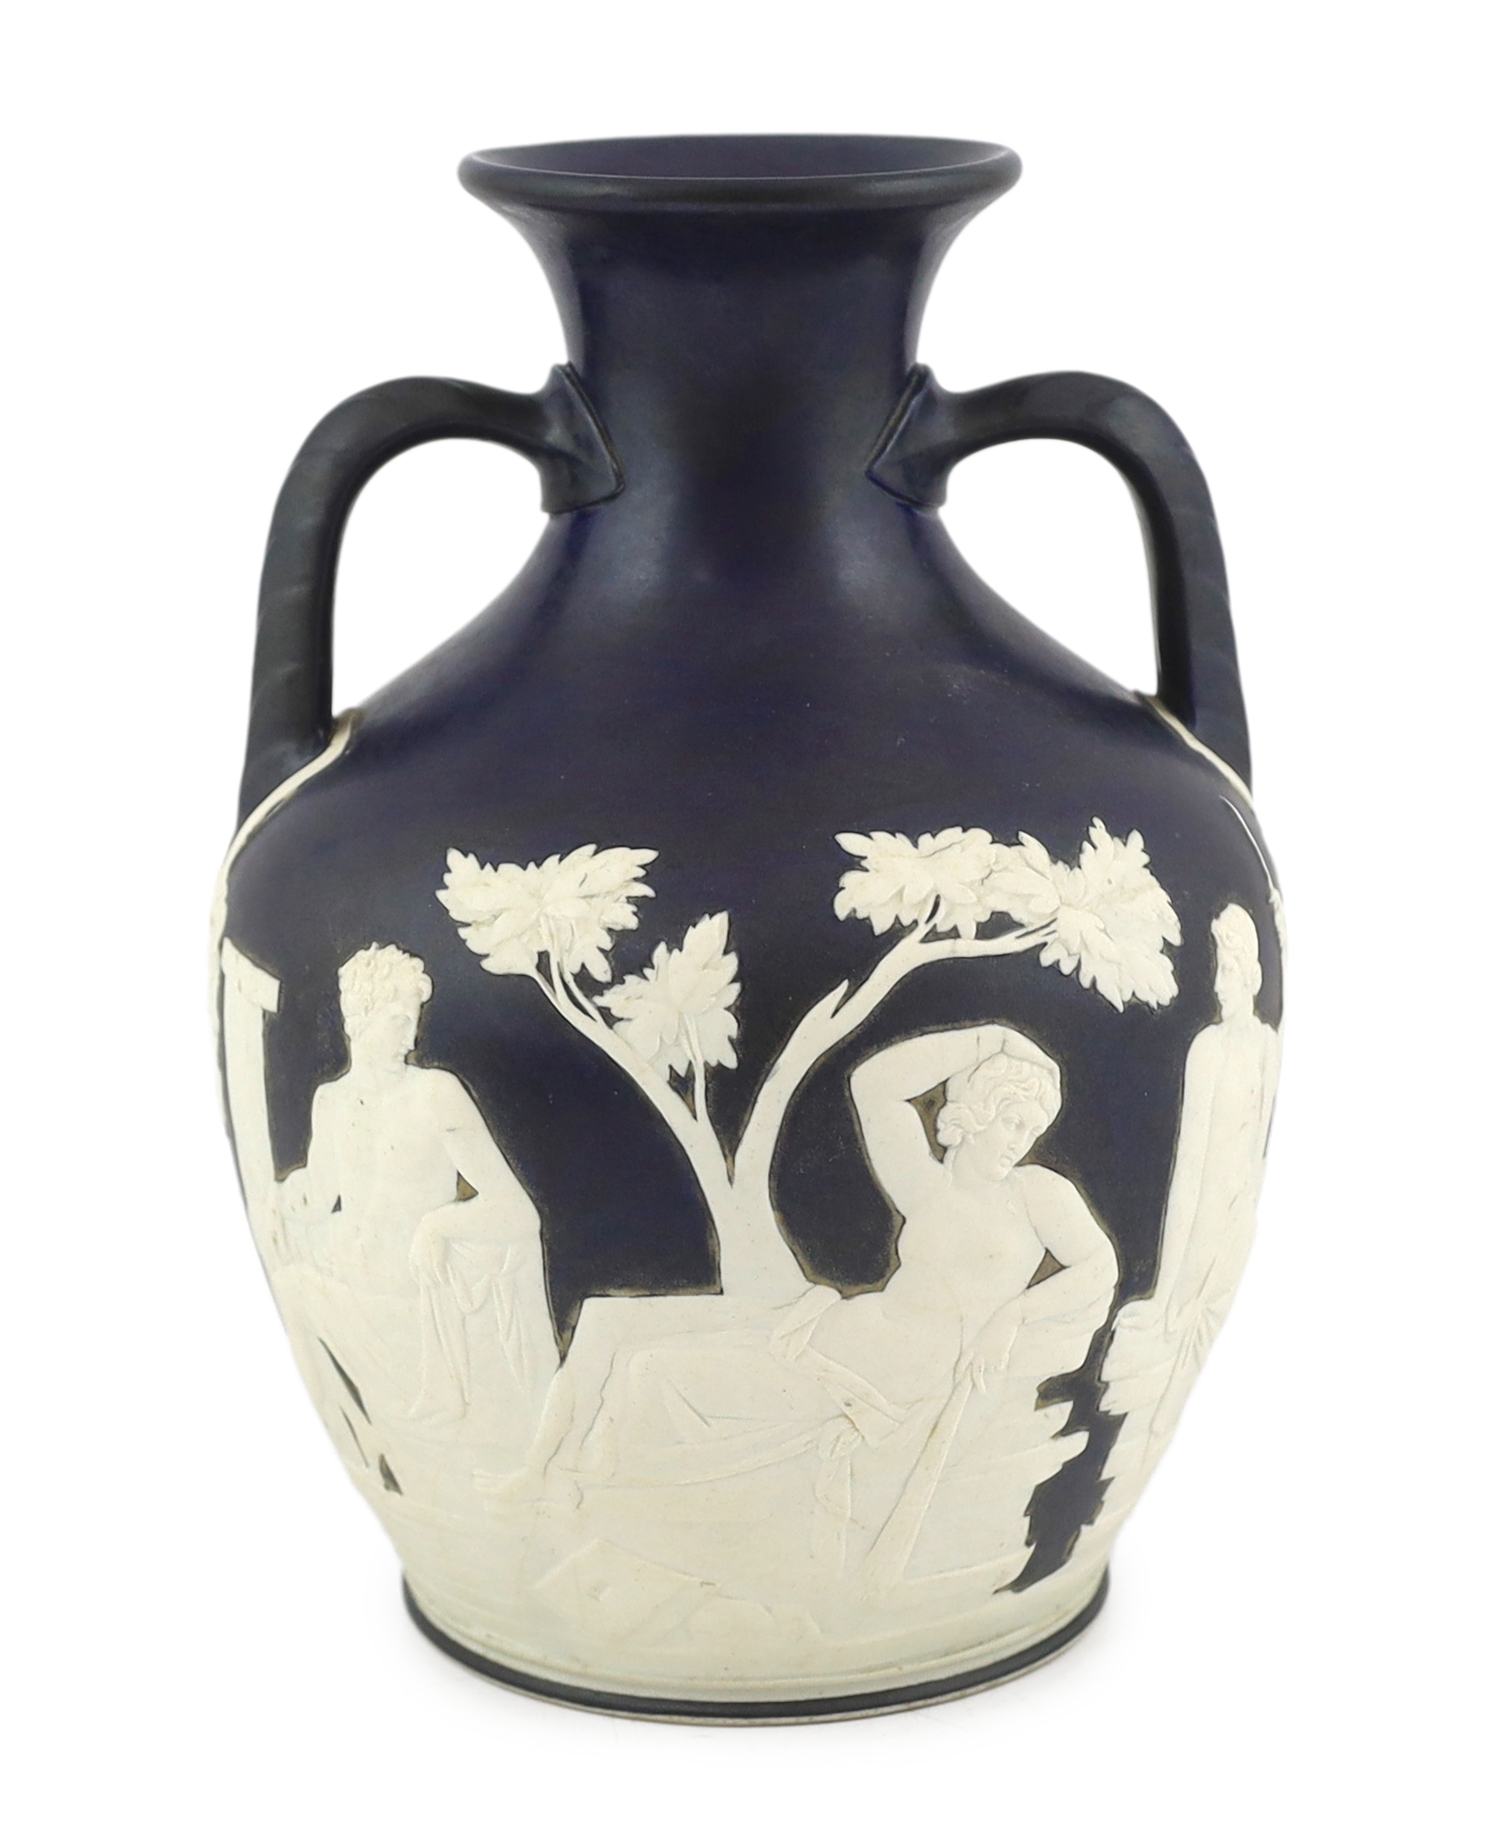 A Wedgwood dark blue glazed and white sprigged replica of the Portland vase, late 19th century